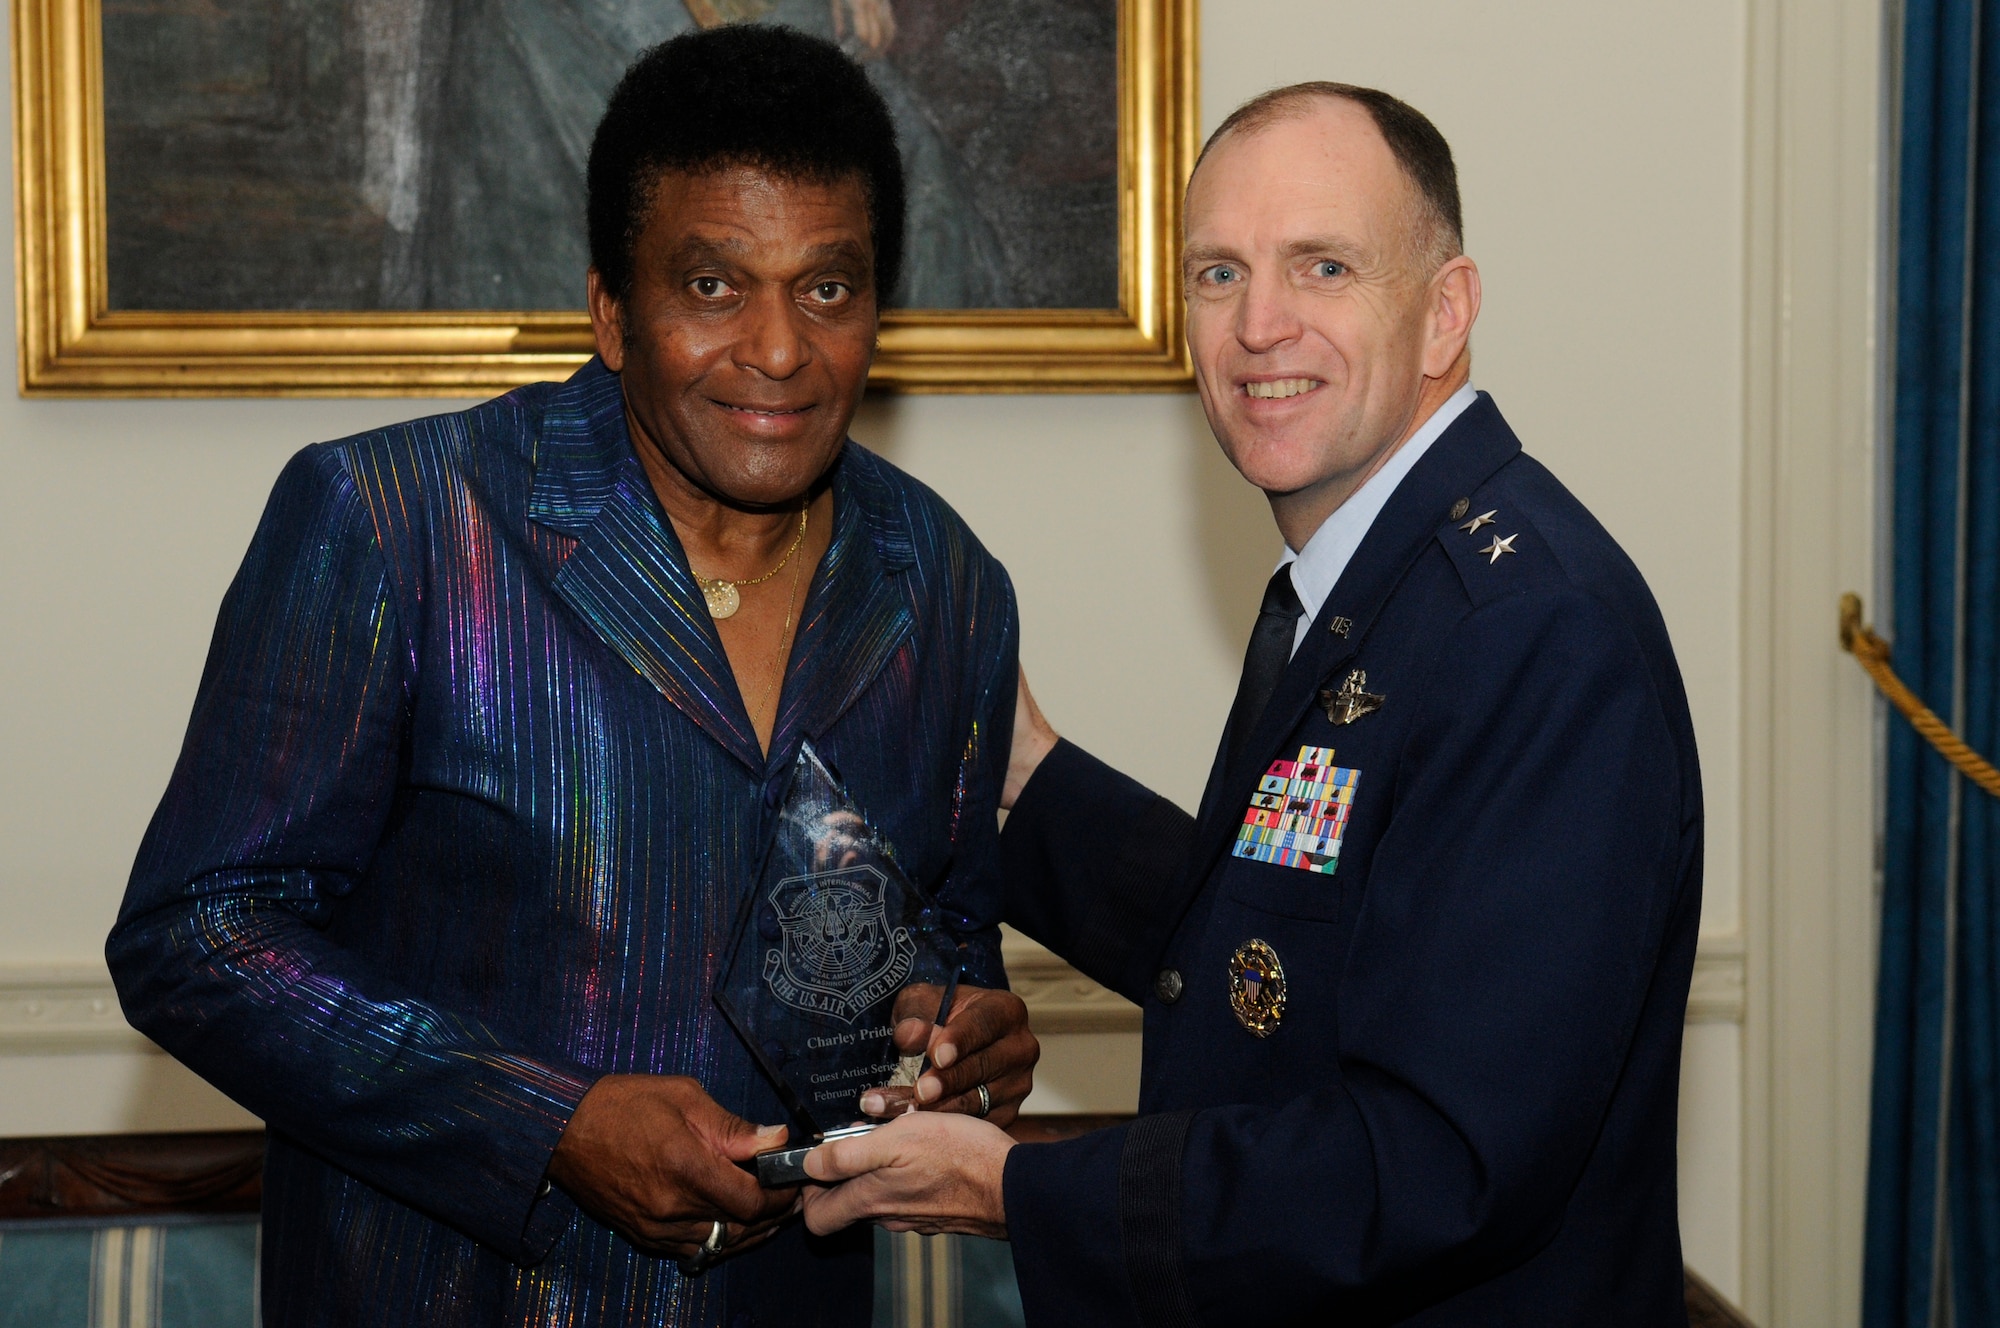 Maj. Gen. Ralph Jodice, Air Force District of Washington commander, presents Charley Pride, legendary Country Music Hall of Fame star, with an appreciation plaque after the completion of this year’s first Guest Artist Series concert at Daughters of the American Revolution Constitution Hall Feb. 22. A special performance was also given by this year’s Col. George S. Howard young artist competition winner Katherine Kohler with guest emcee Bernie Lucas, host of America’s Music on 98.7 WMZQ. (U.S. Air Force photo by Staff Sgt. Dan DeCook)